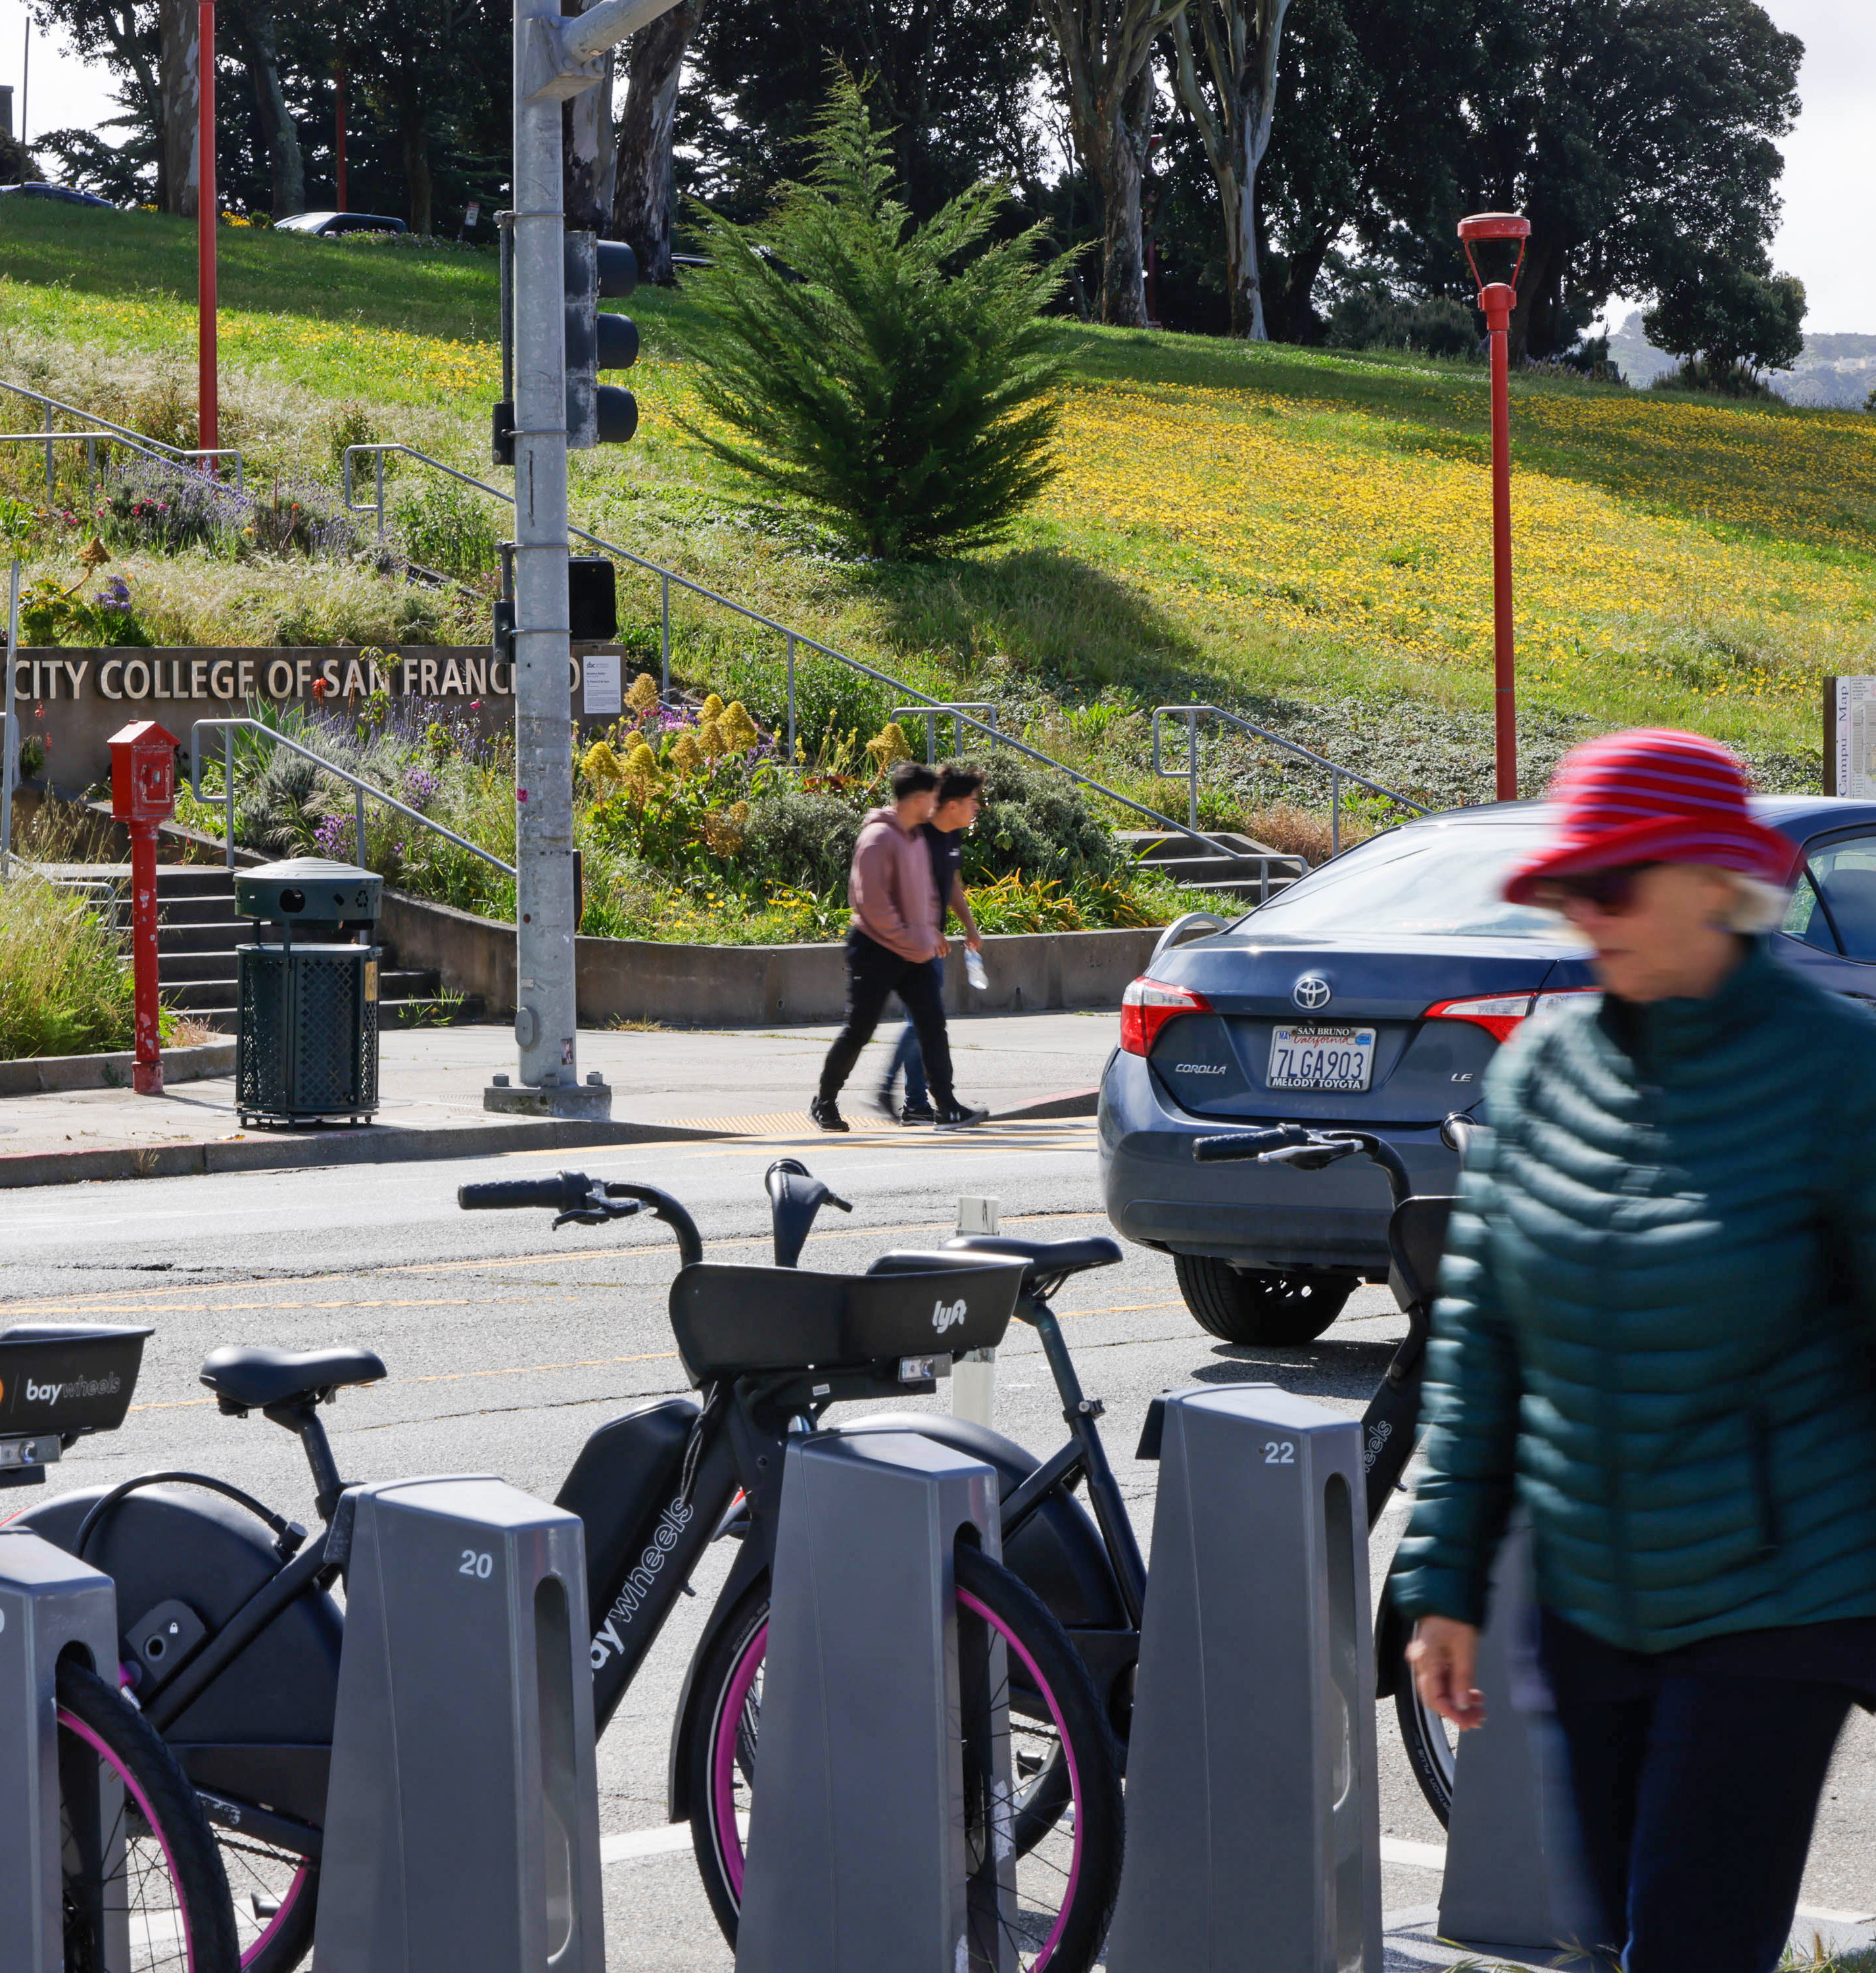 A busy sidewalk with a bike share station, people walking, a car, and a lush hillside with yellow flowers in the background.